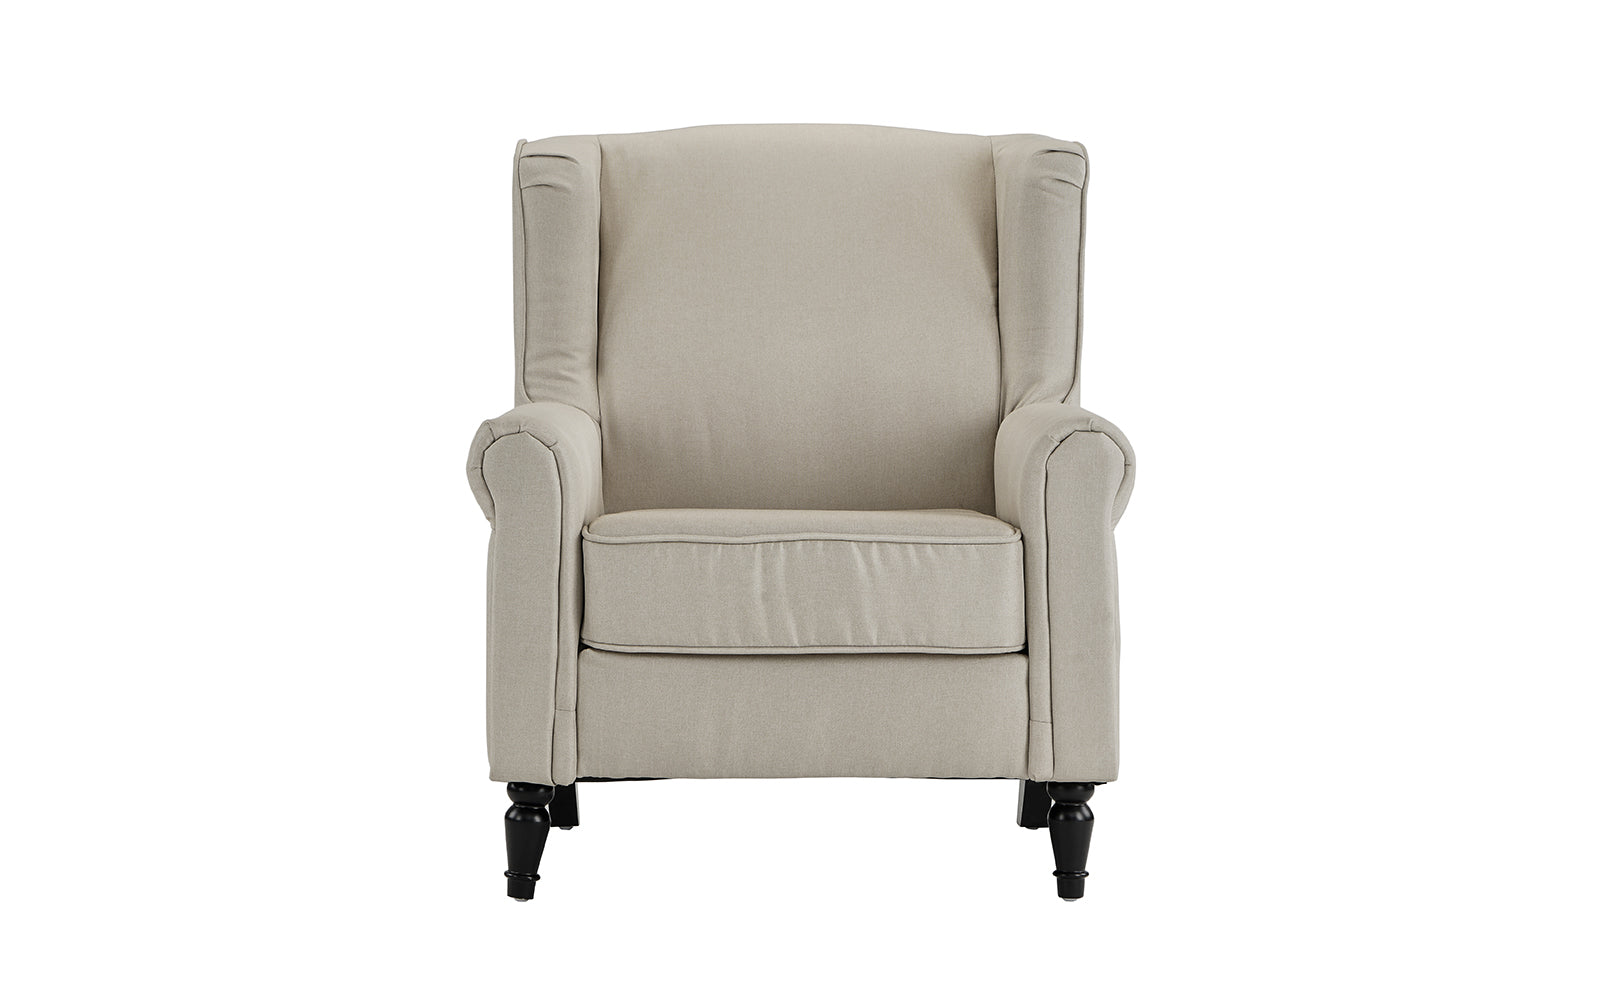 Alec Classic and Comfortable Linen Upholstered Armchair